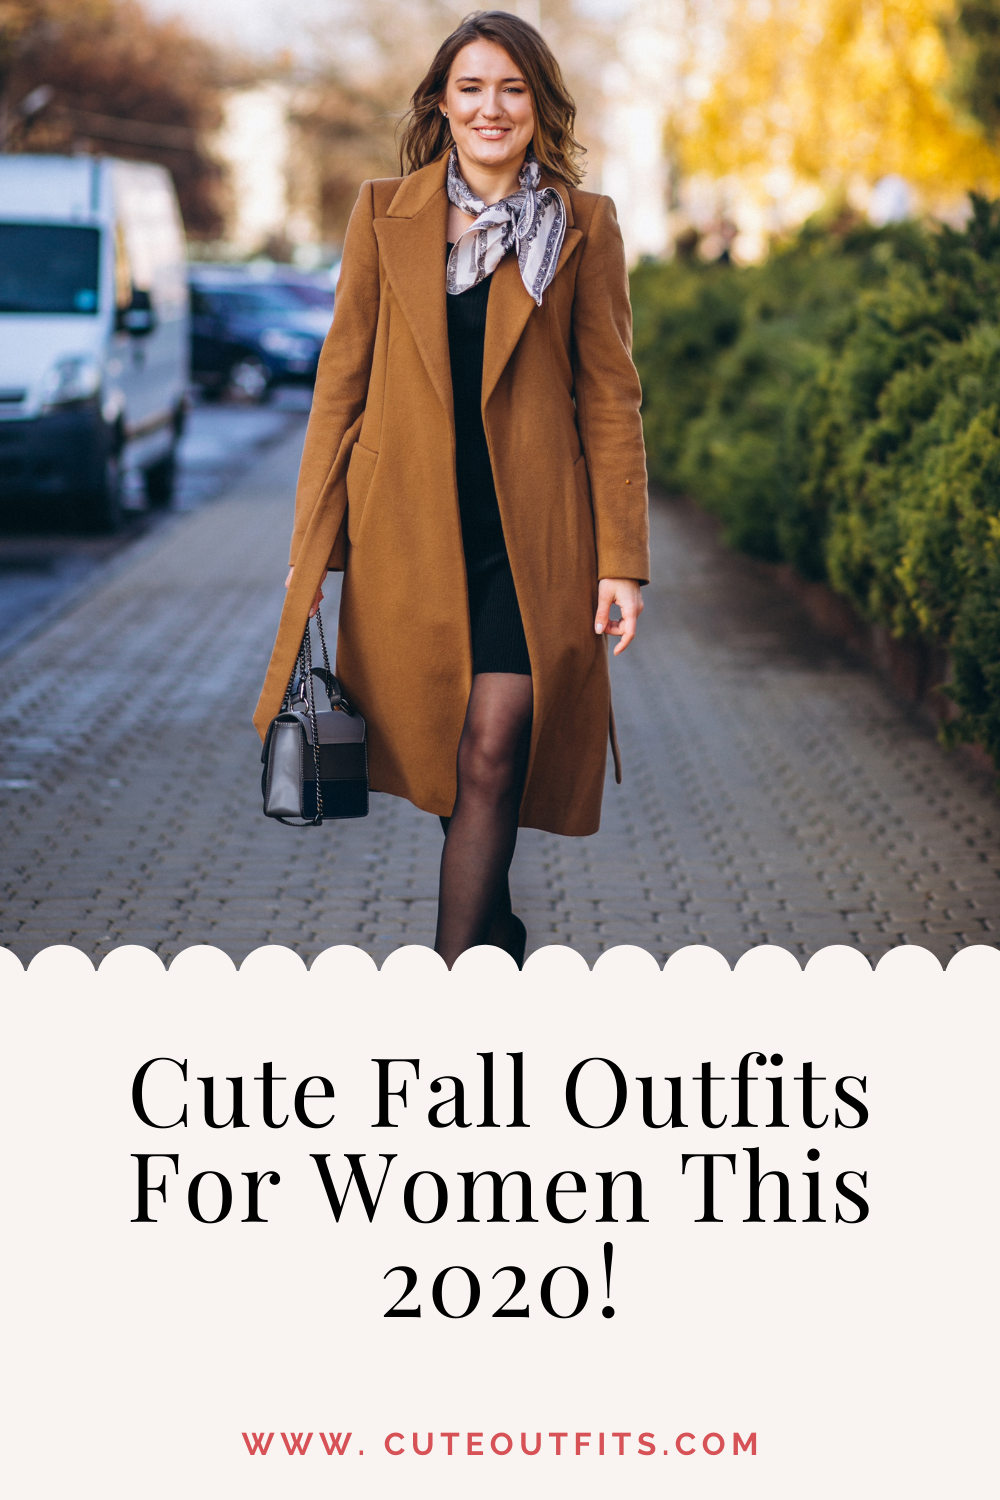 placard | Cute Fall Outfits For Women This 2020!